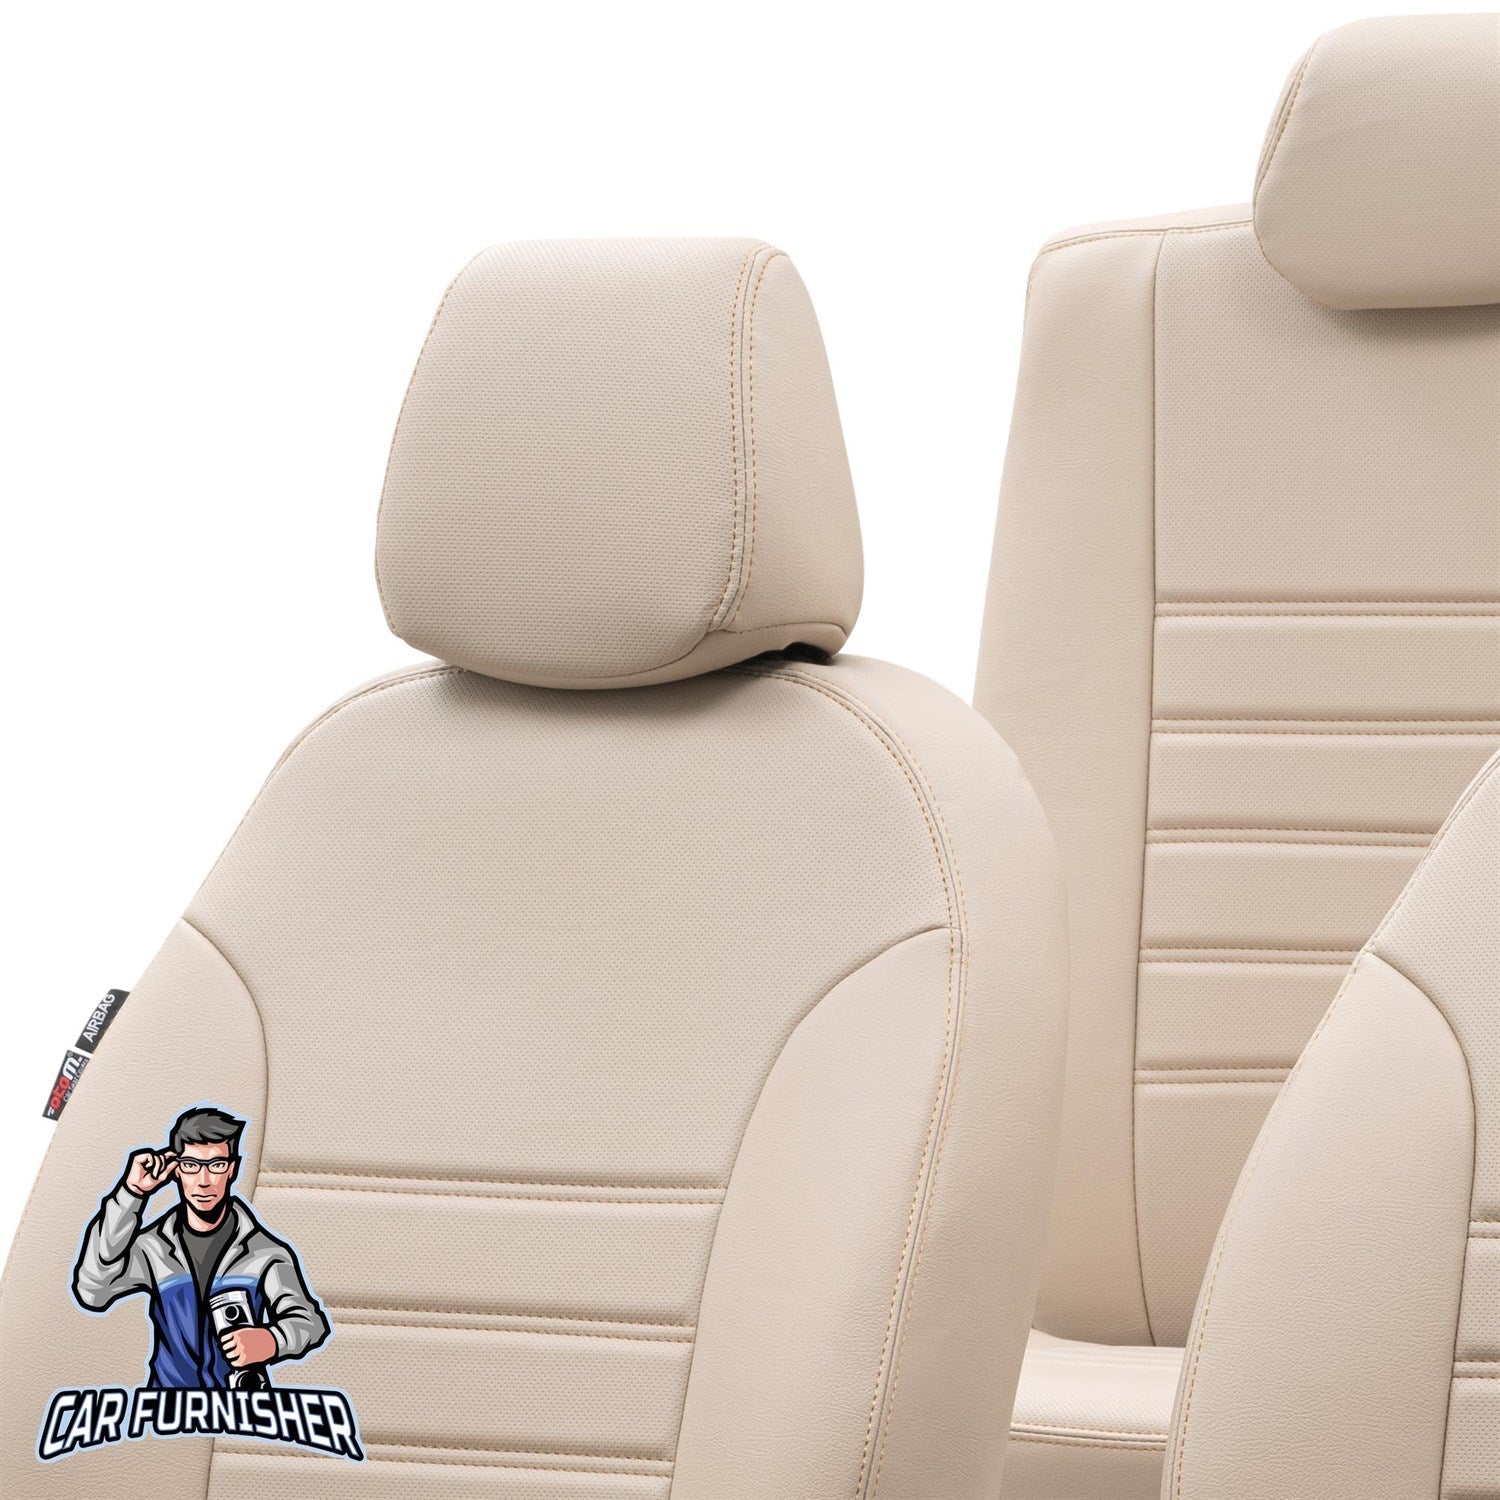 Audi Q7 Seat Cover Istanbul Leather Design Beige Leather